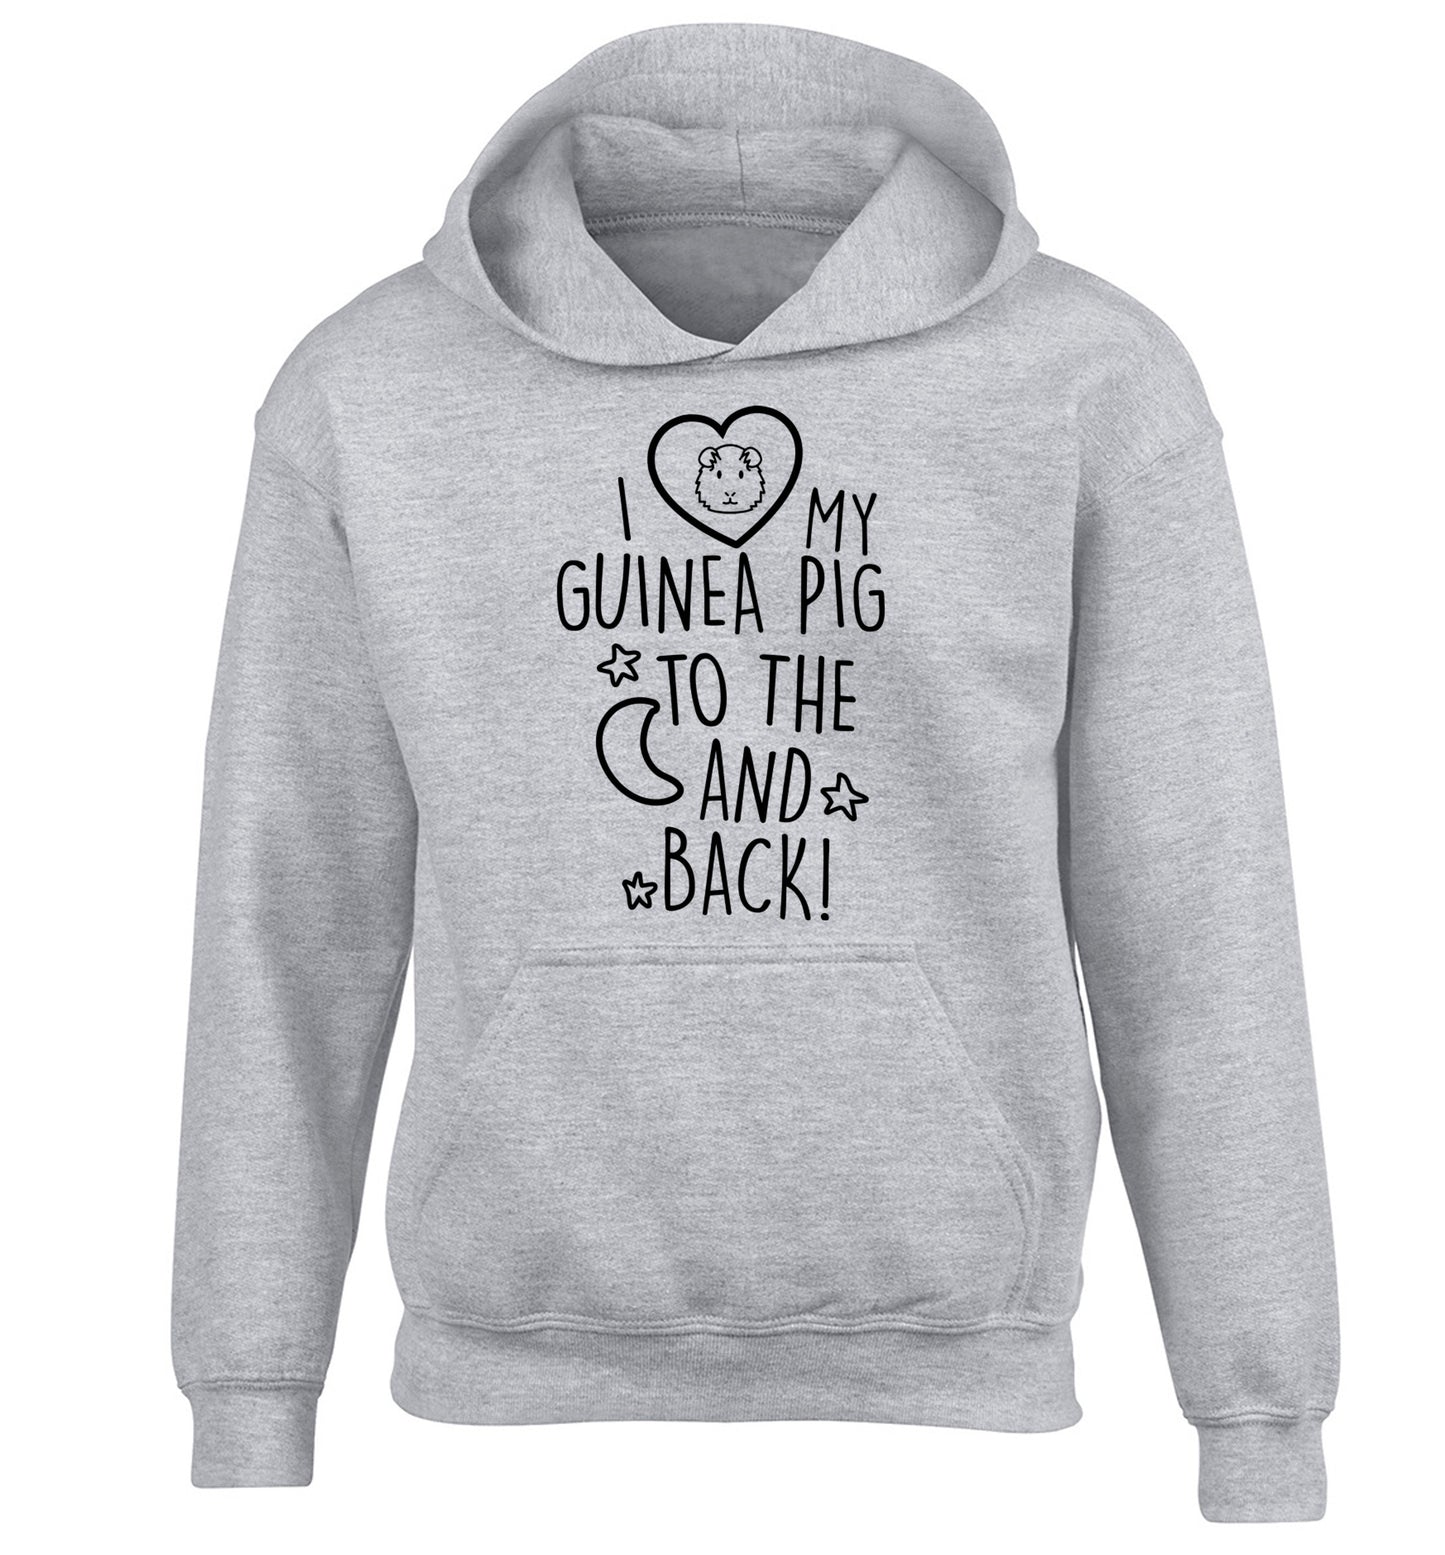 I love my guinea pig to the moon and back children's grey hoodie 12-14 Years